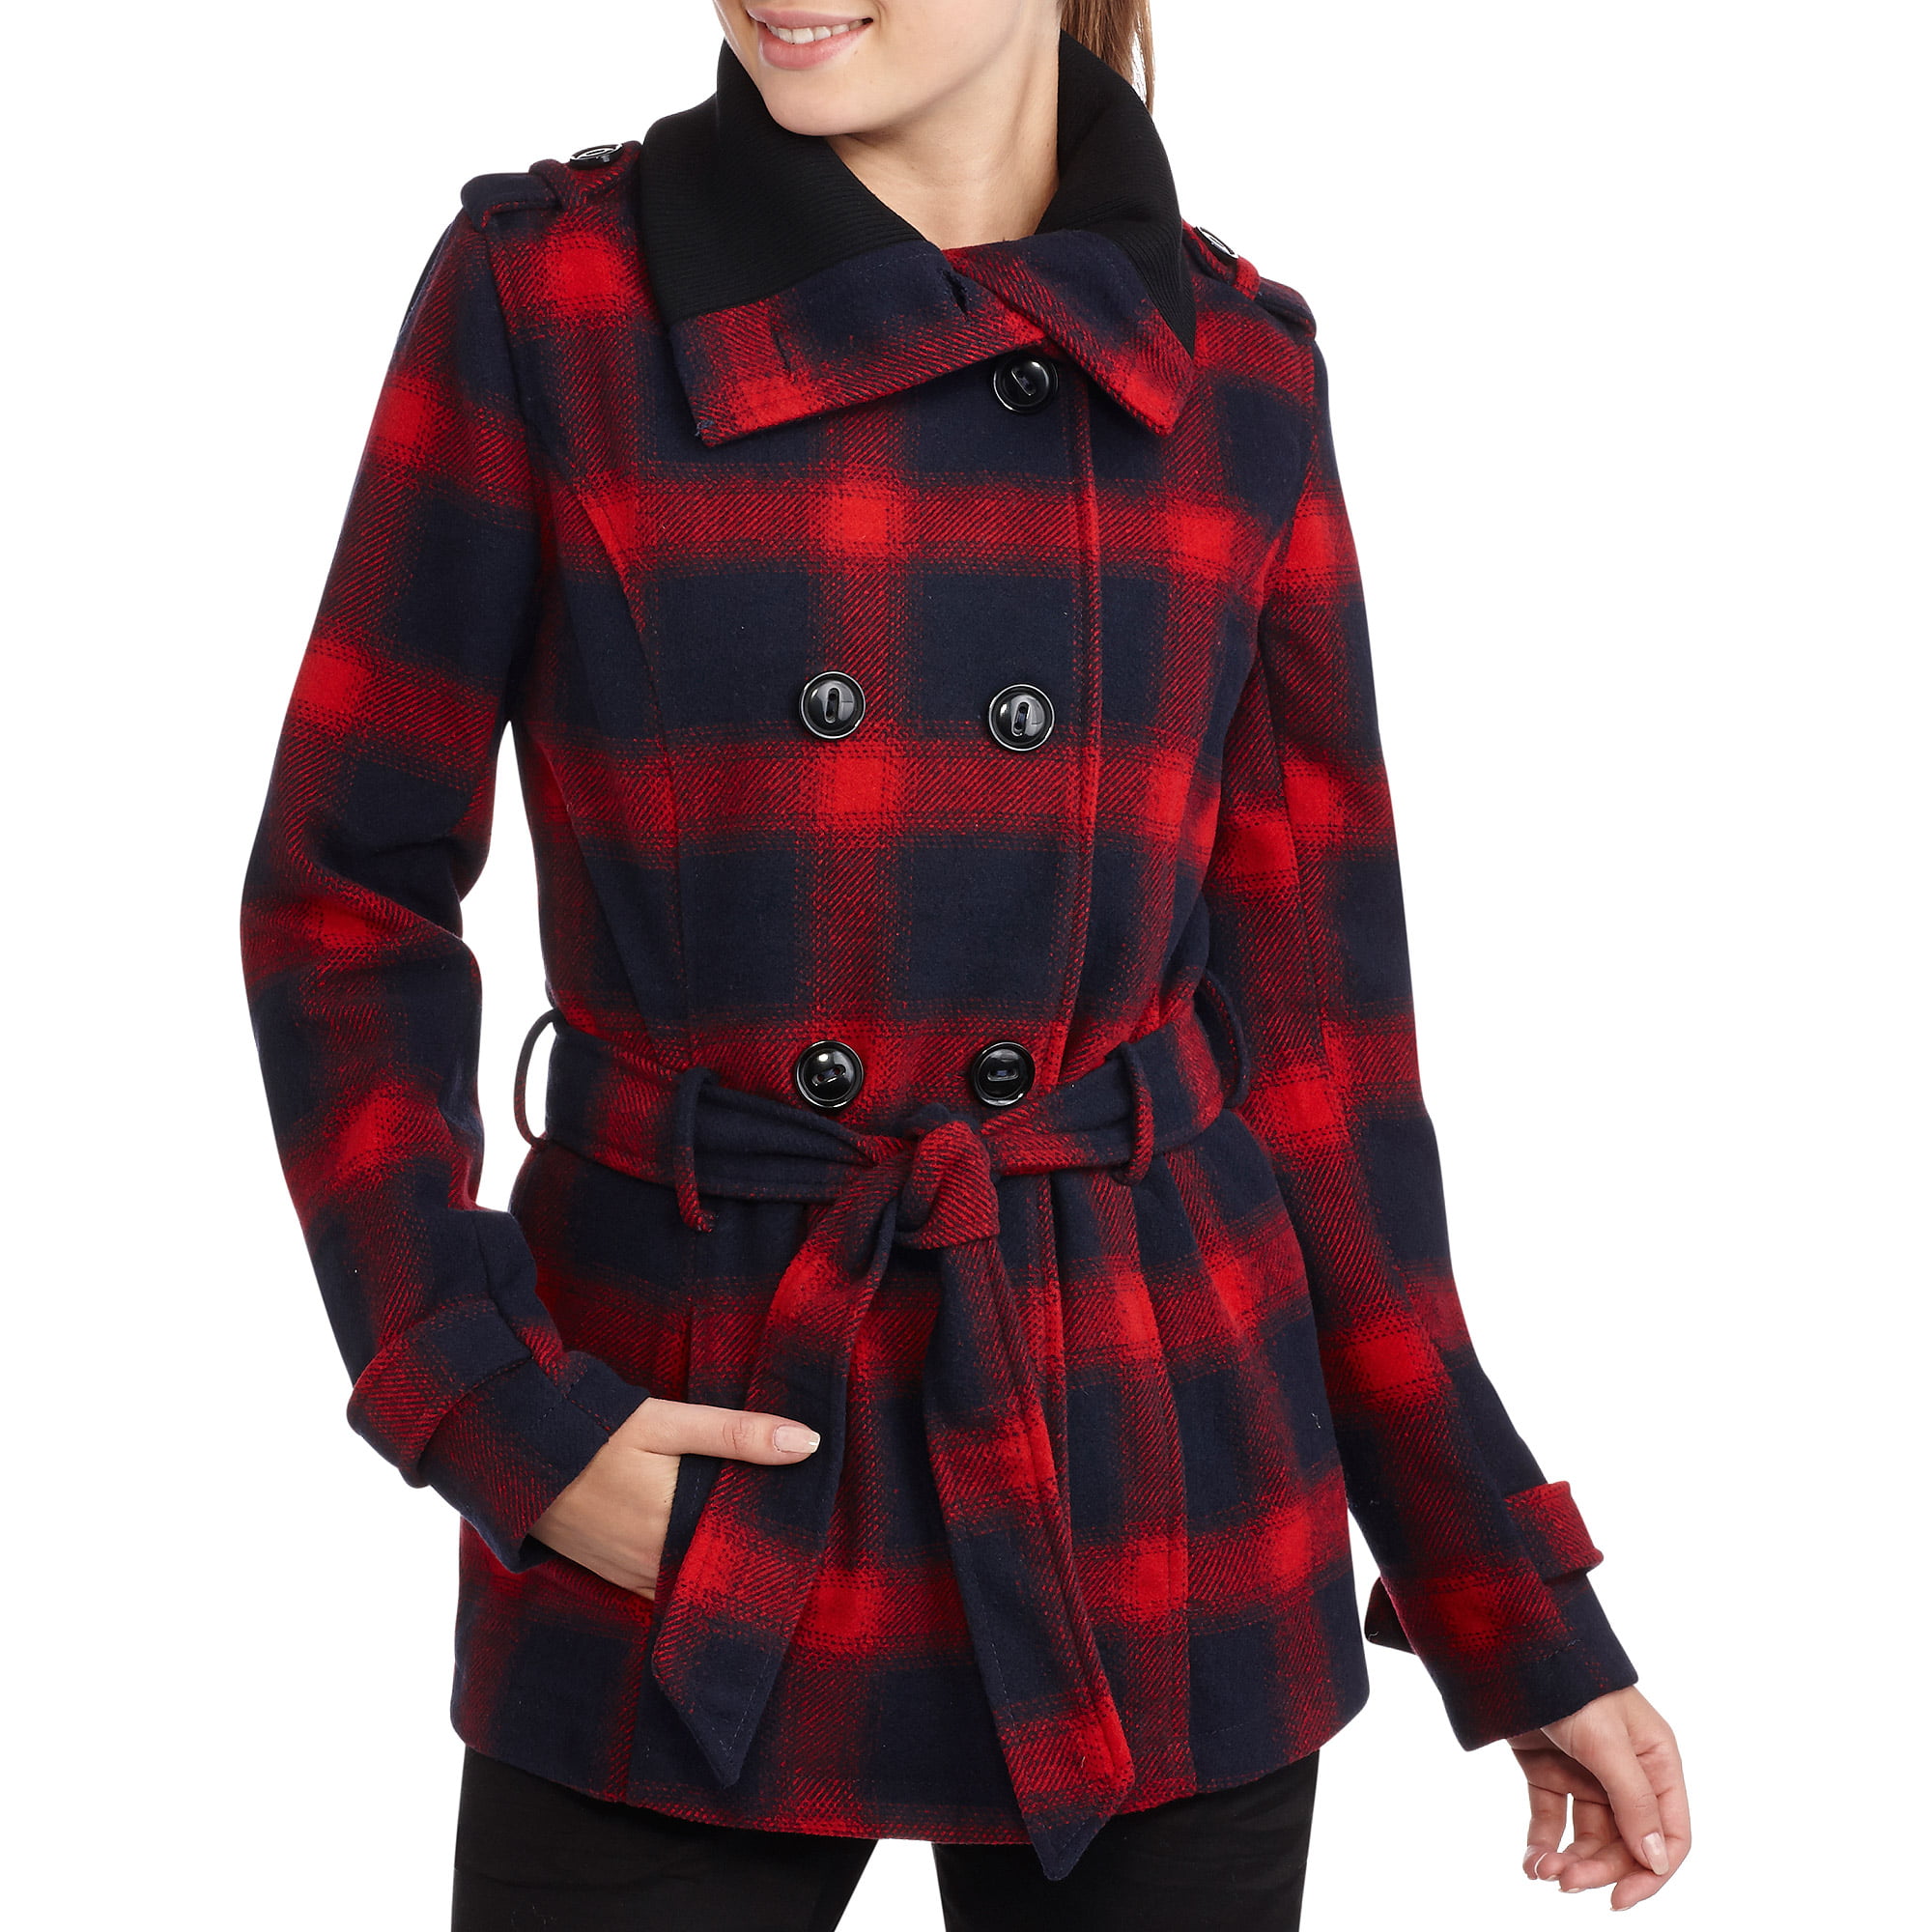 Juniors Belted Wool-Blend Peacoat With Foldover Collar - Walmart.com